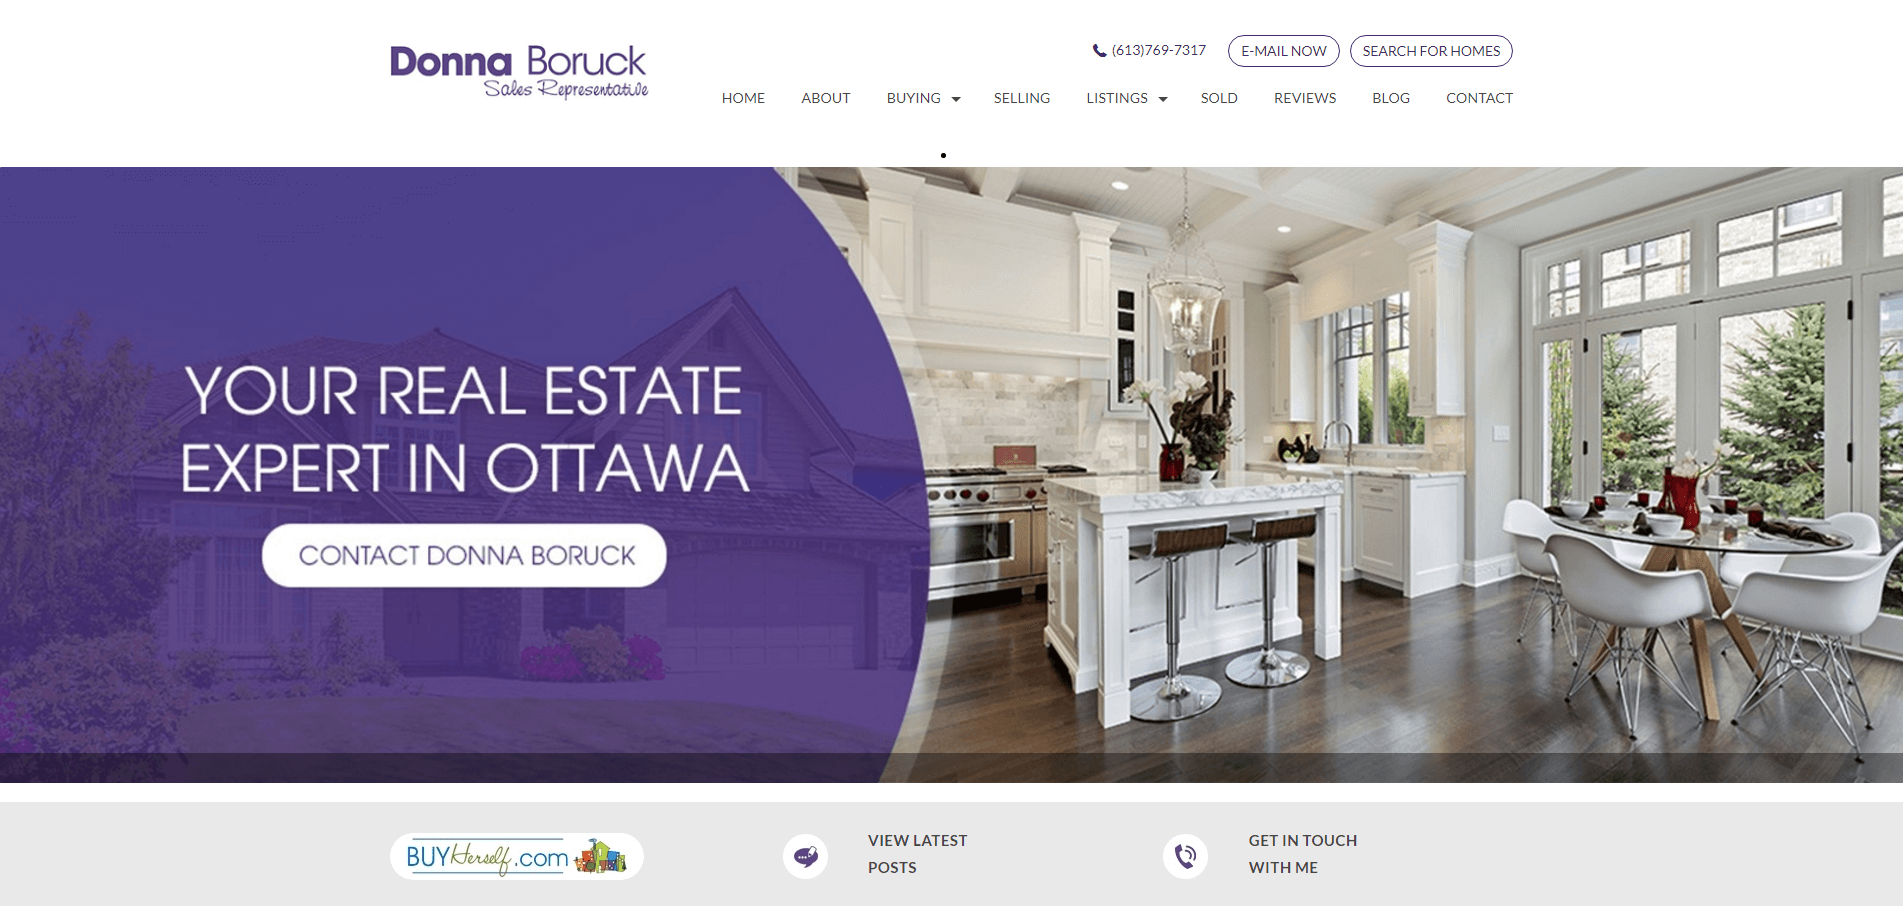  WOW!  Here are 101 of the best real estate websites.  We ranked each site 1-101 and reviewed them all.  Here's donnaboruck.com.  Want to see who made the list? 